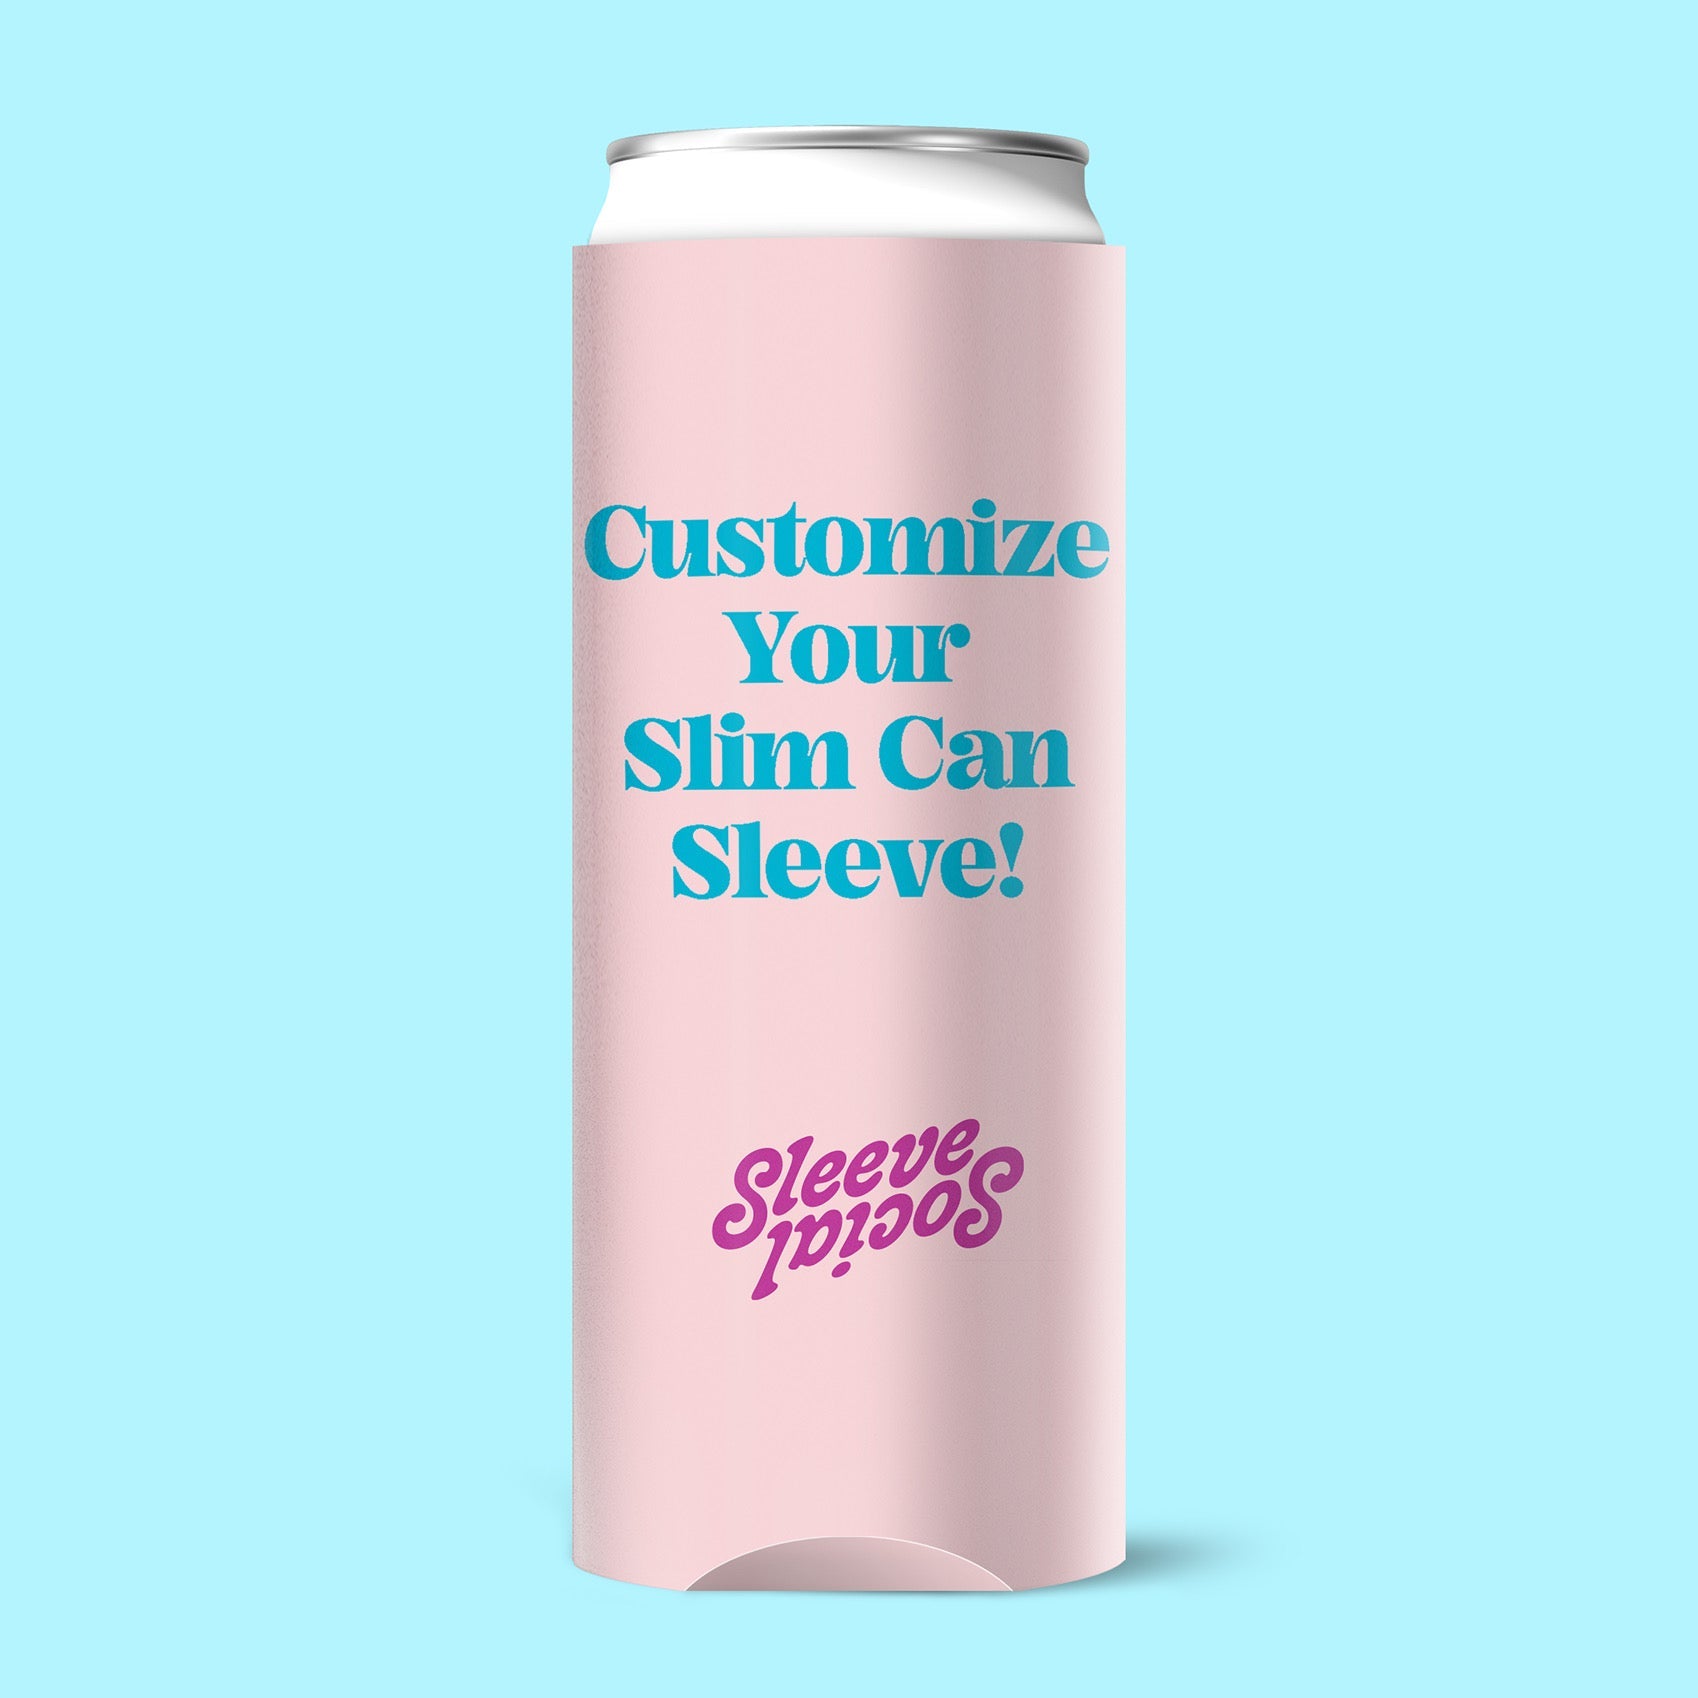 Customize Your Slim Can Social Sleeve!